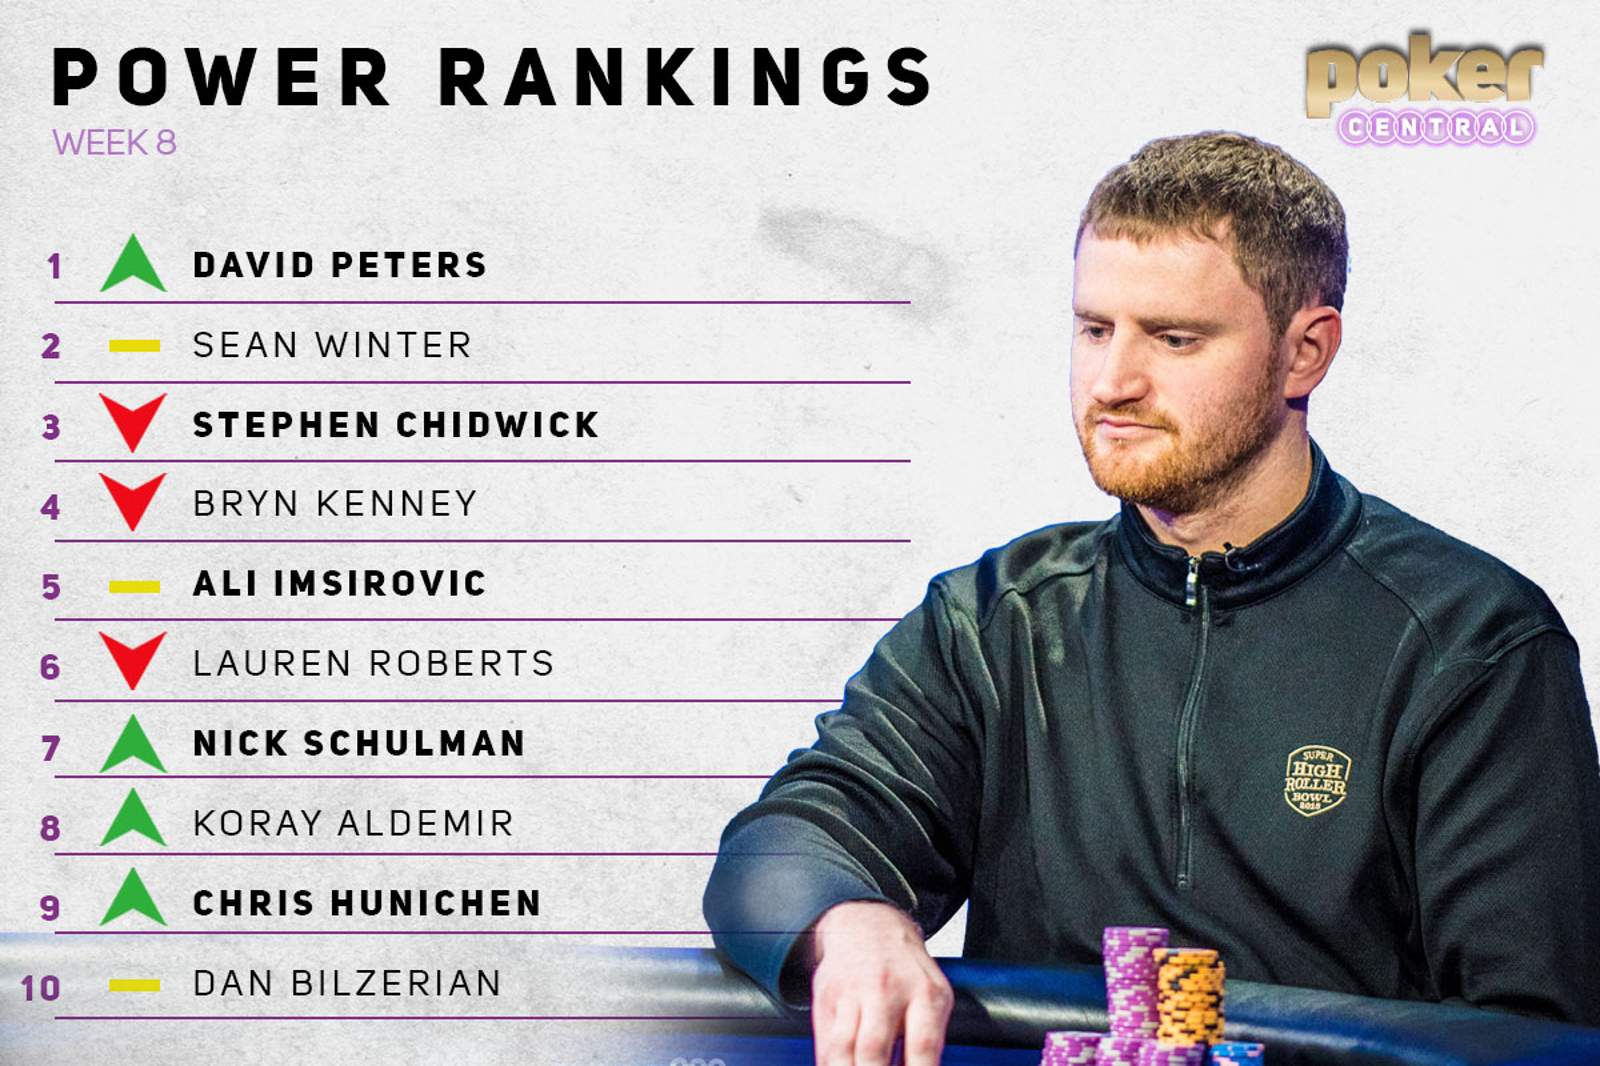 Poker Central Power Rankings: Putting Respect on David Peters' Name!